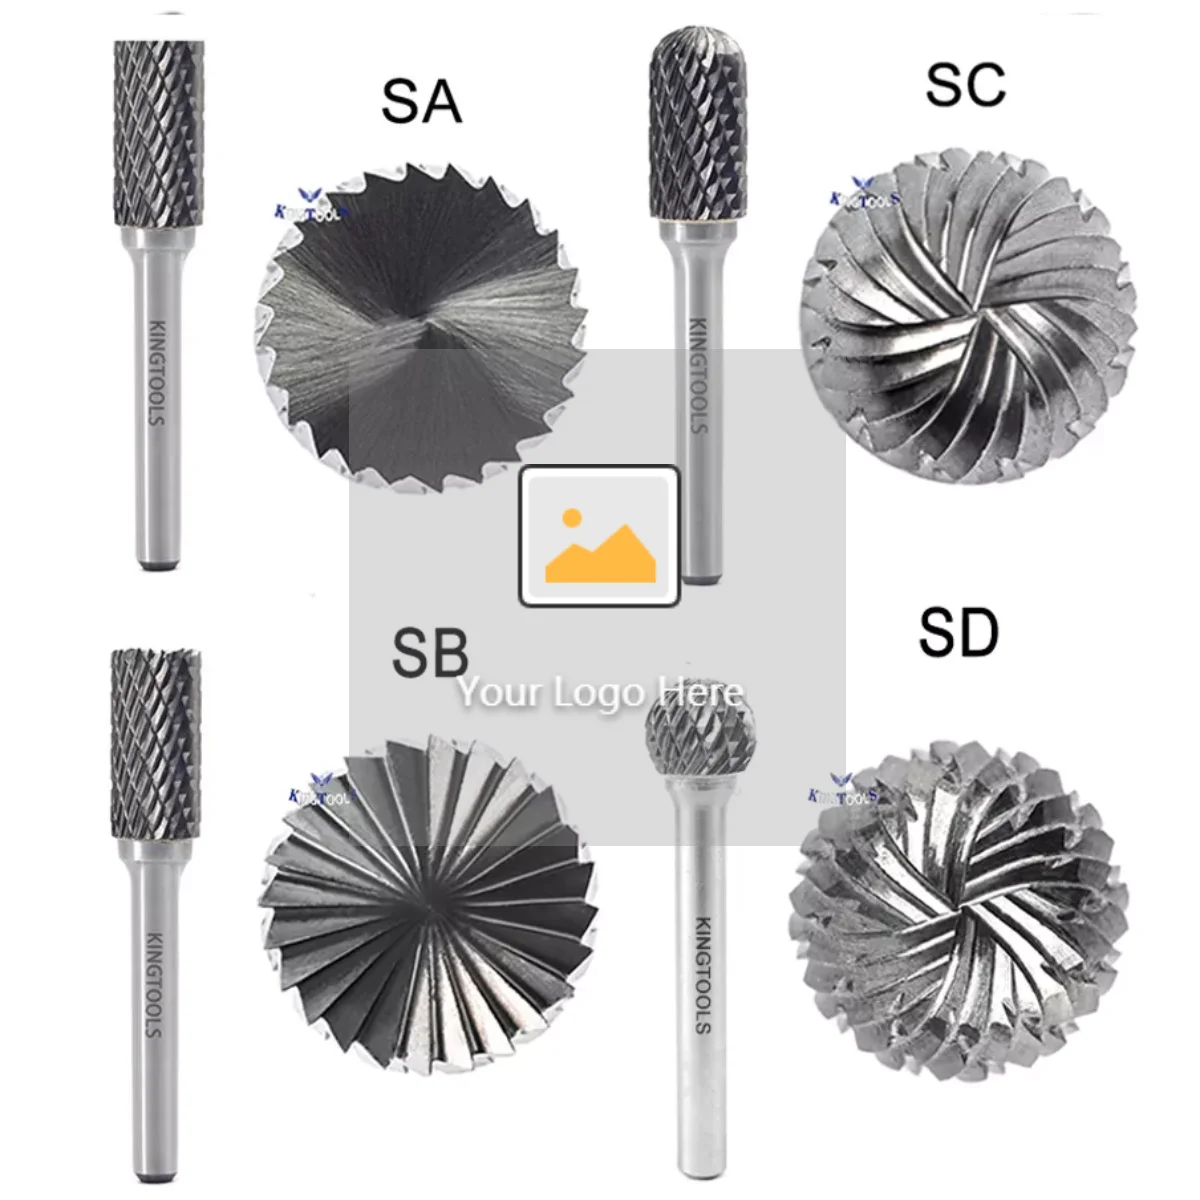 1/8” Shank for DIY Woodworking Carving Engraving Drilling 20Pcs Rotary Bits Tungsten Carbide Rotary Burr Set 3mm 